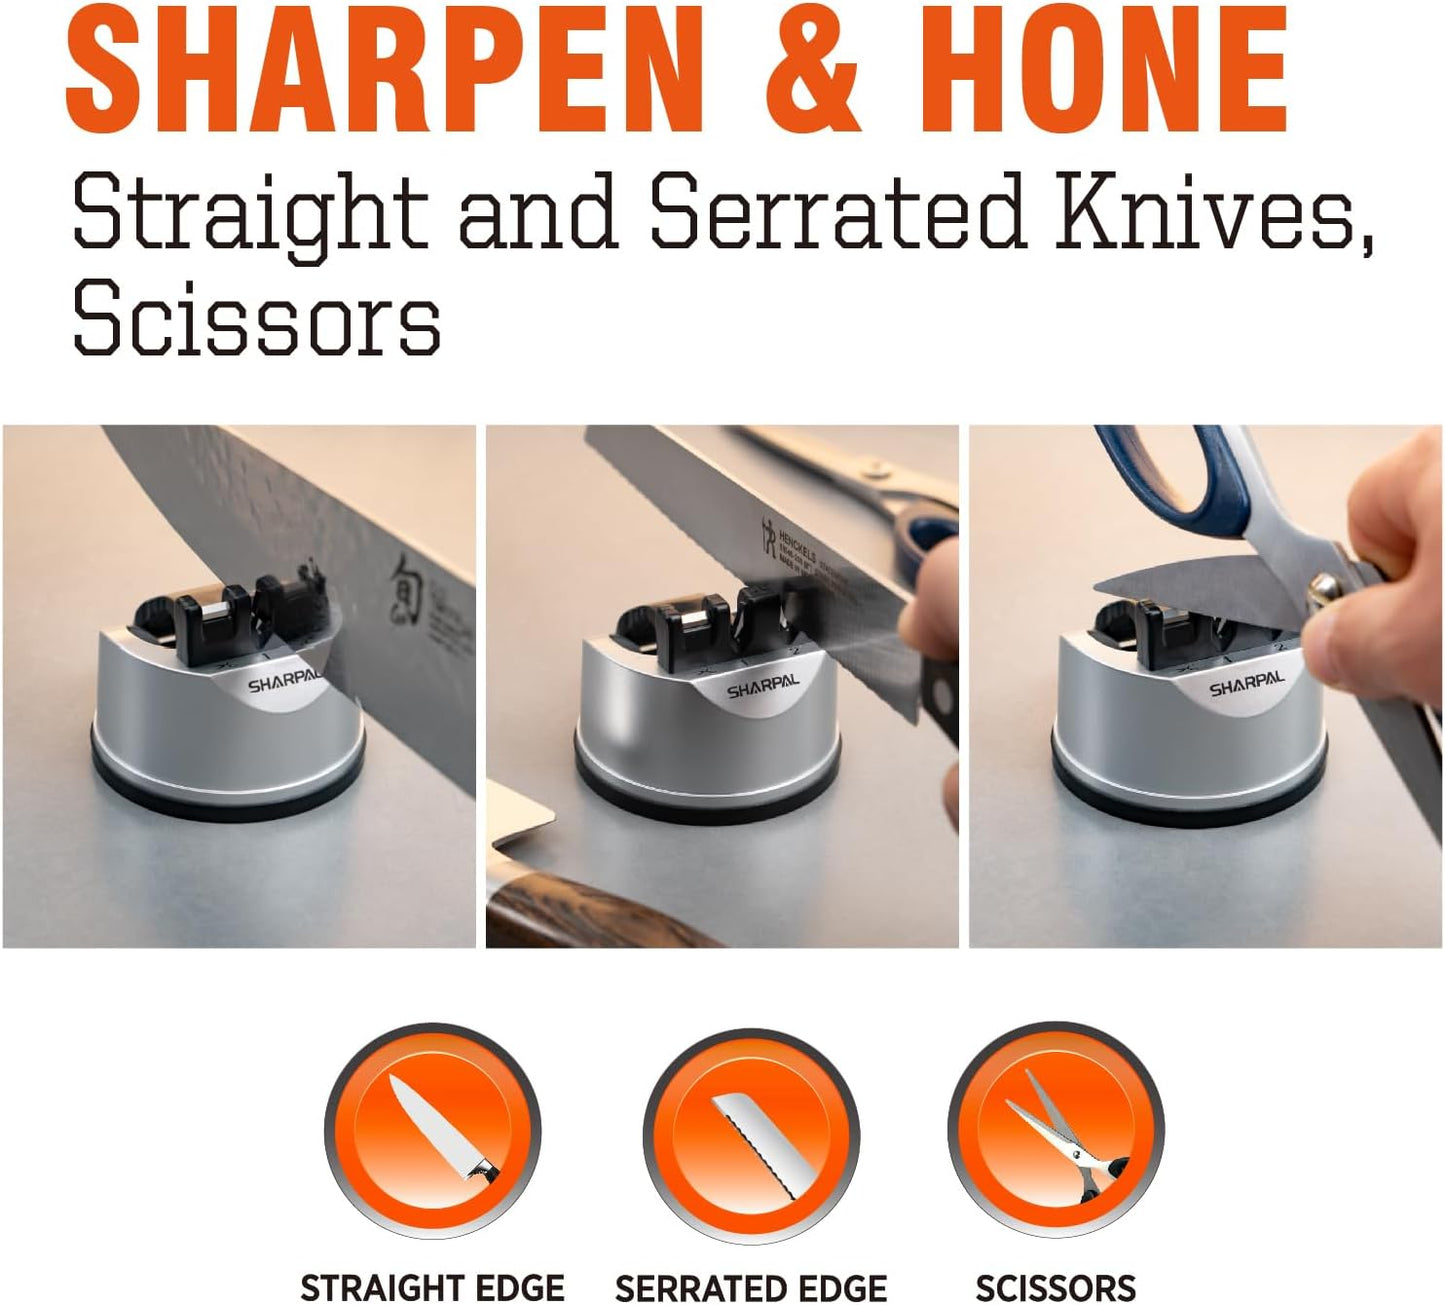 KD 3-Stage Knife Sharpening Tool Helps Repair and Restore Blades